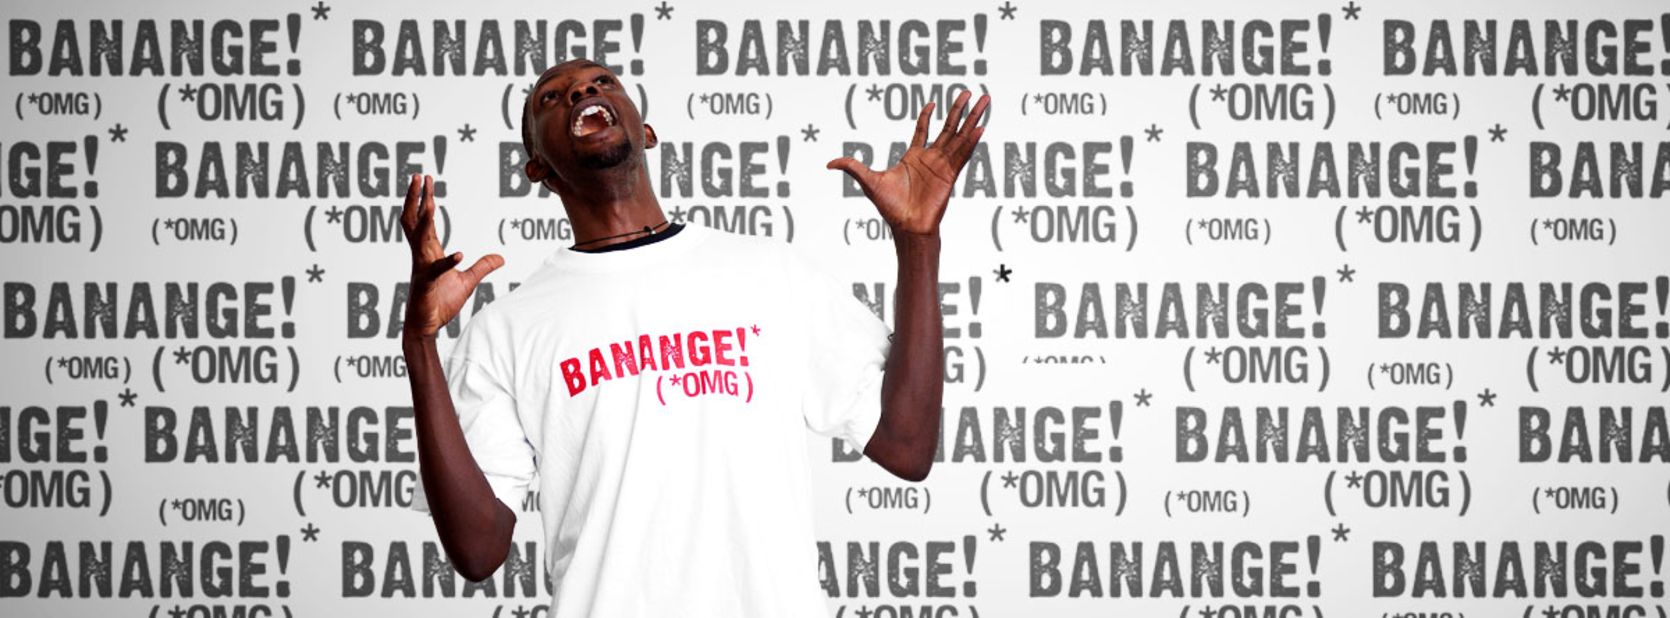 <a href="http://www.definitionafrica.com/" target="_blank" target="_blank">Definition Africa</a> is a t-shirt business based in Kampala, Uganda. The energy and vitality of Ugandan life is translated into clothing, incorporating local designs and everyday expressions. "Banange" is a saying used in Luganda and  loosely means "oh my gosh."